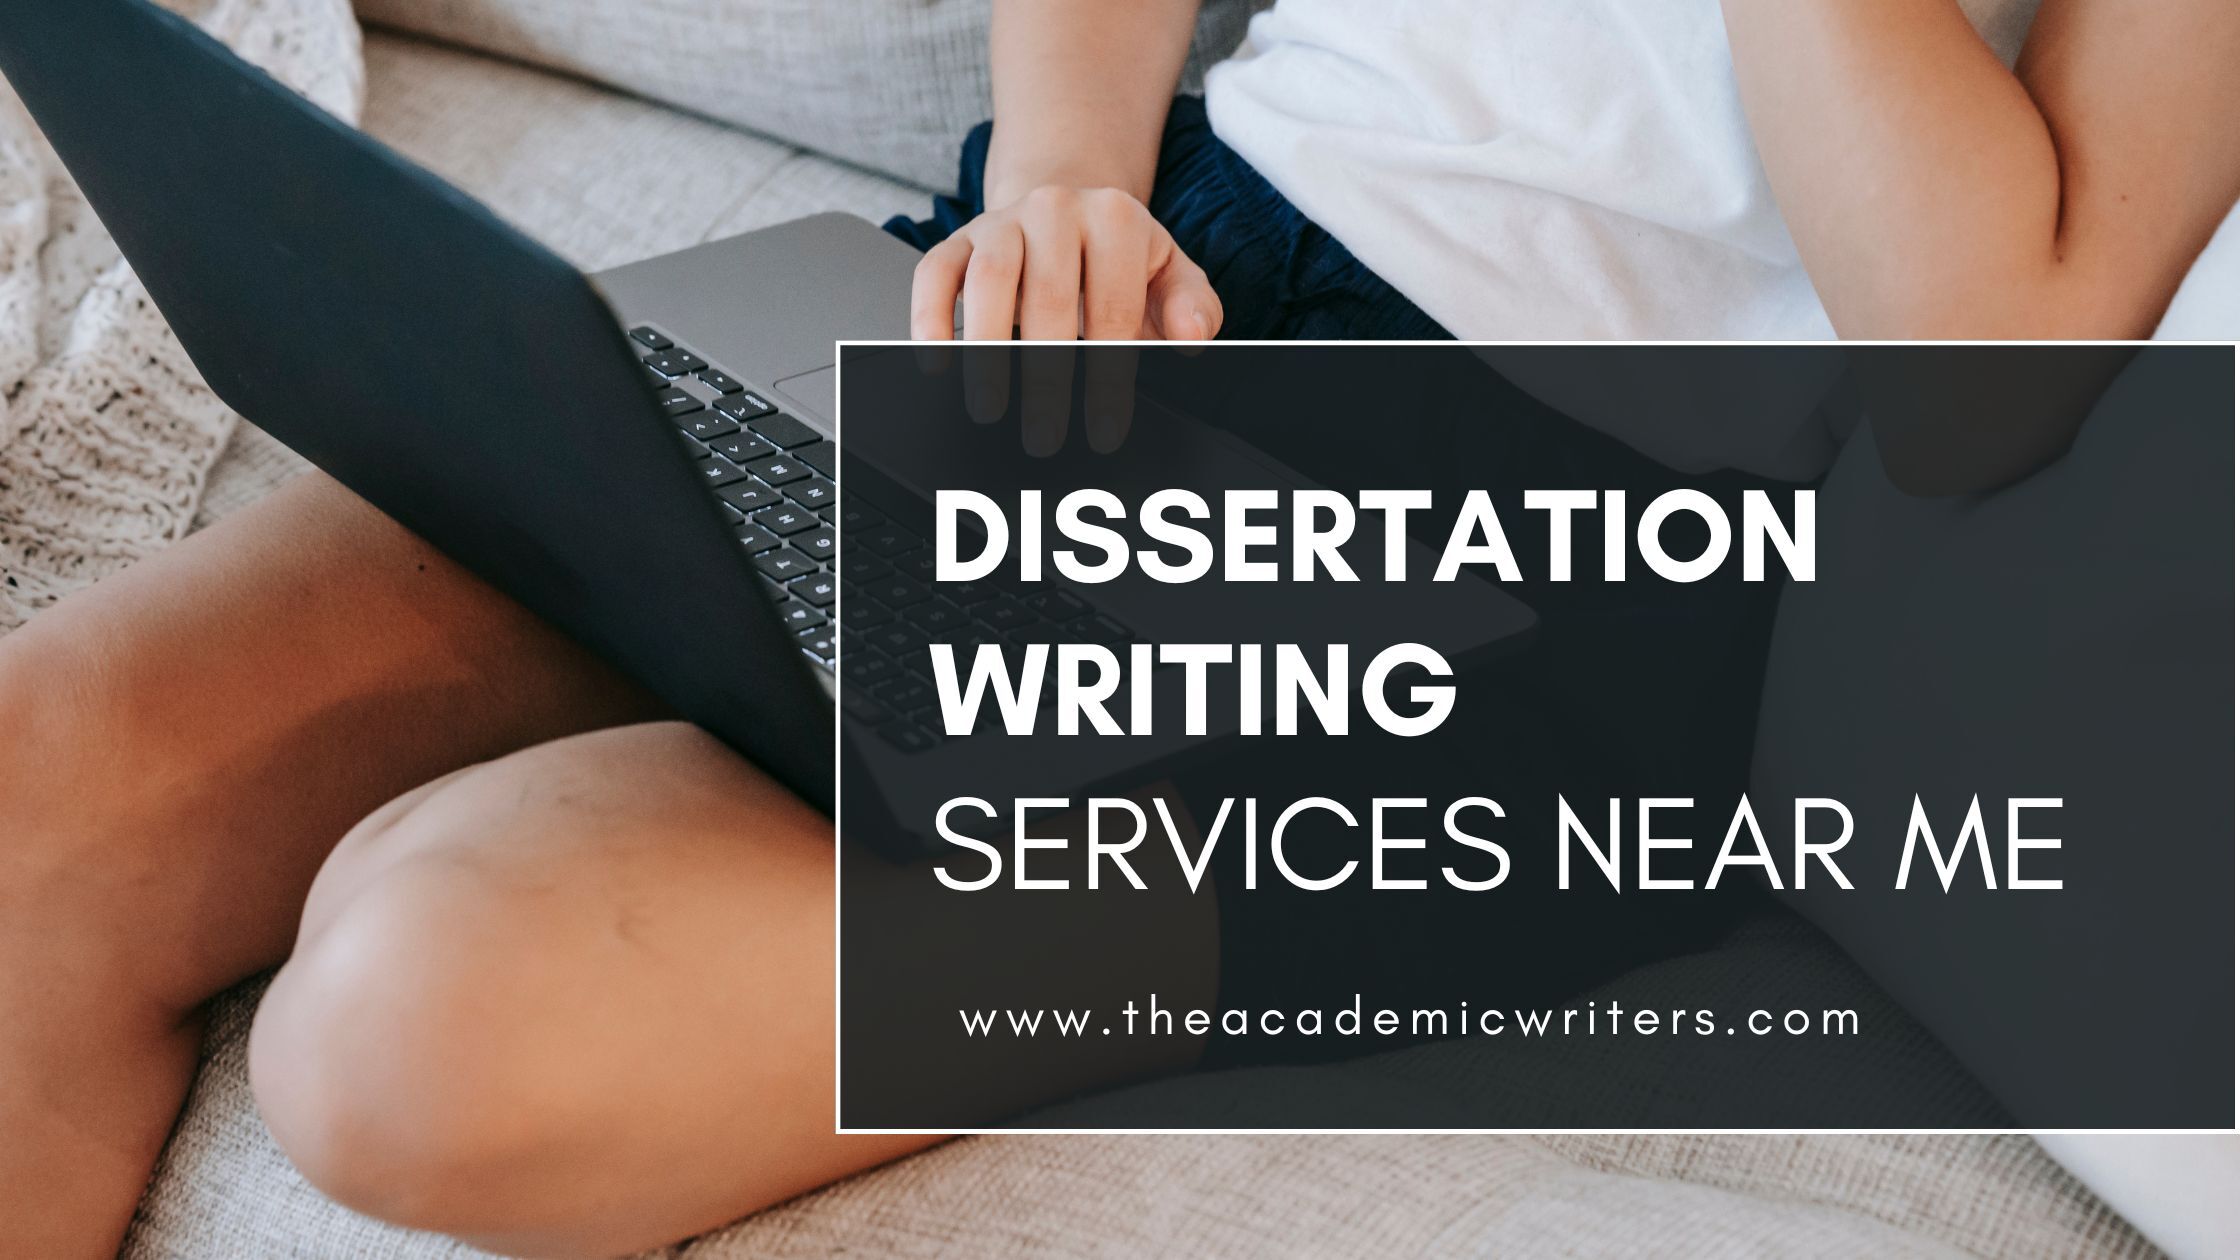 Dissertation writing services near me